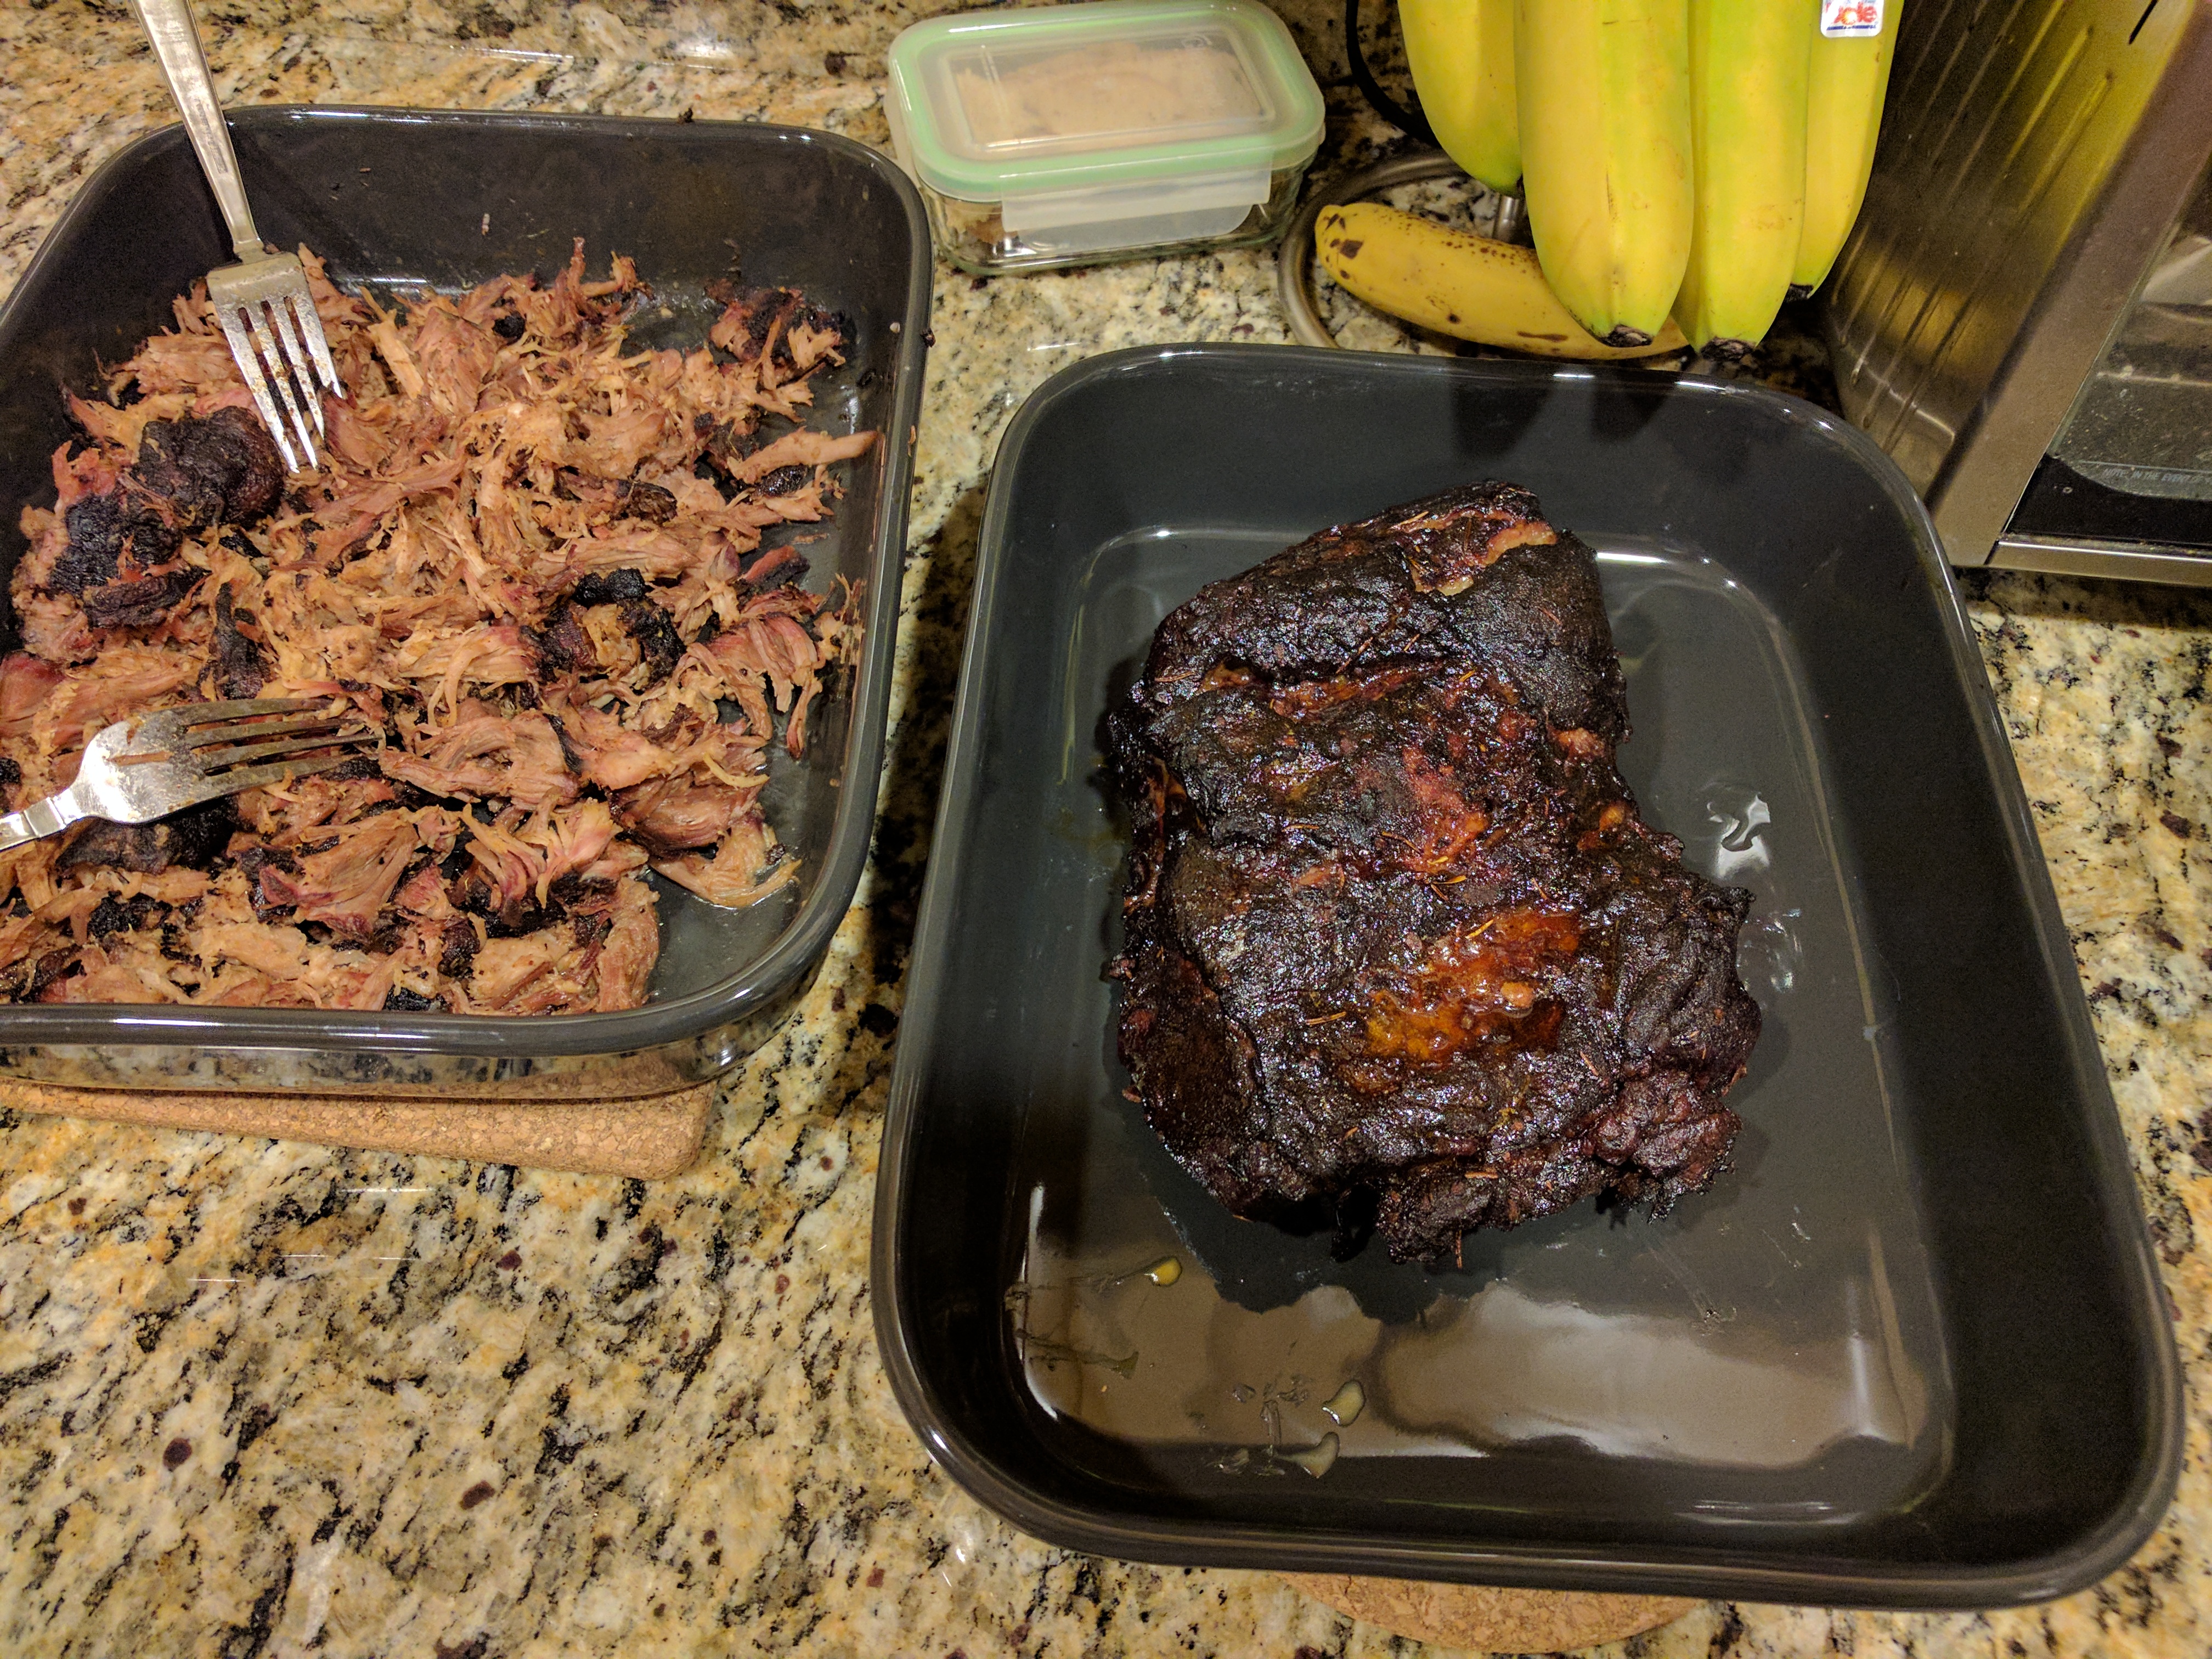 One pulled pork and one freshly plucked from the kettle